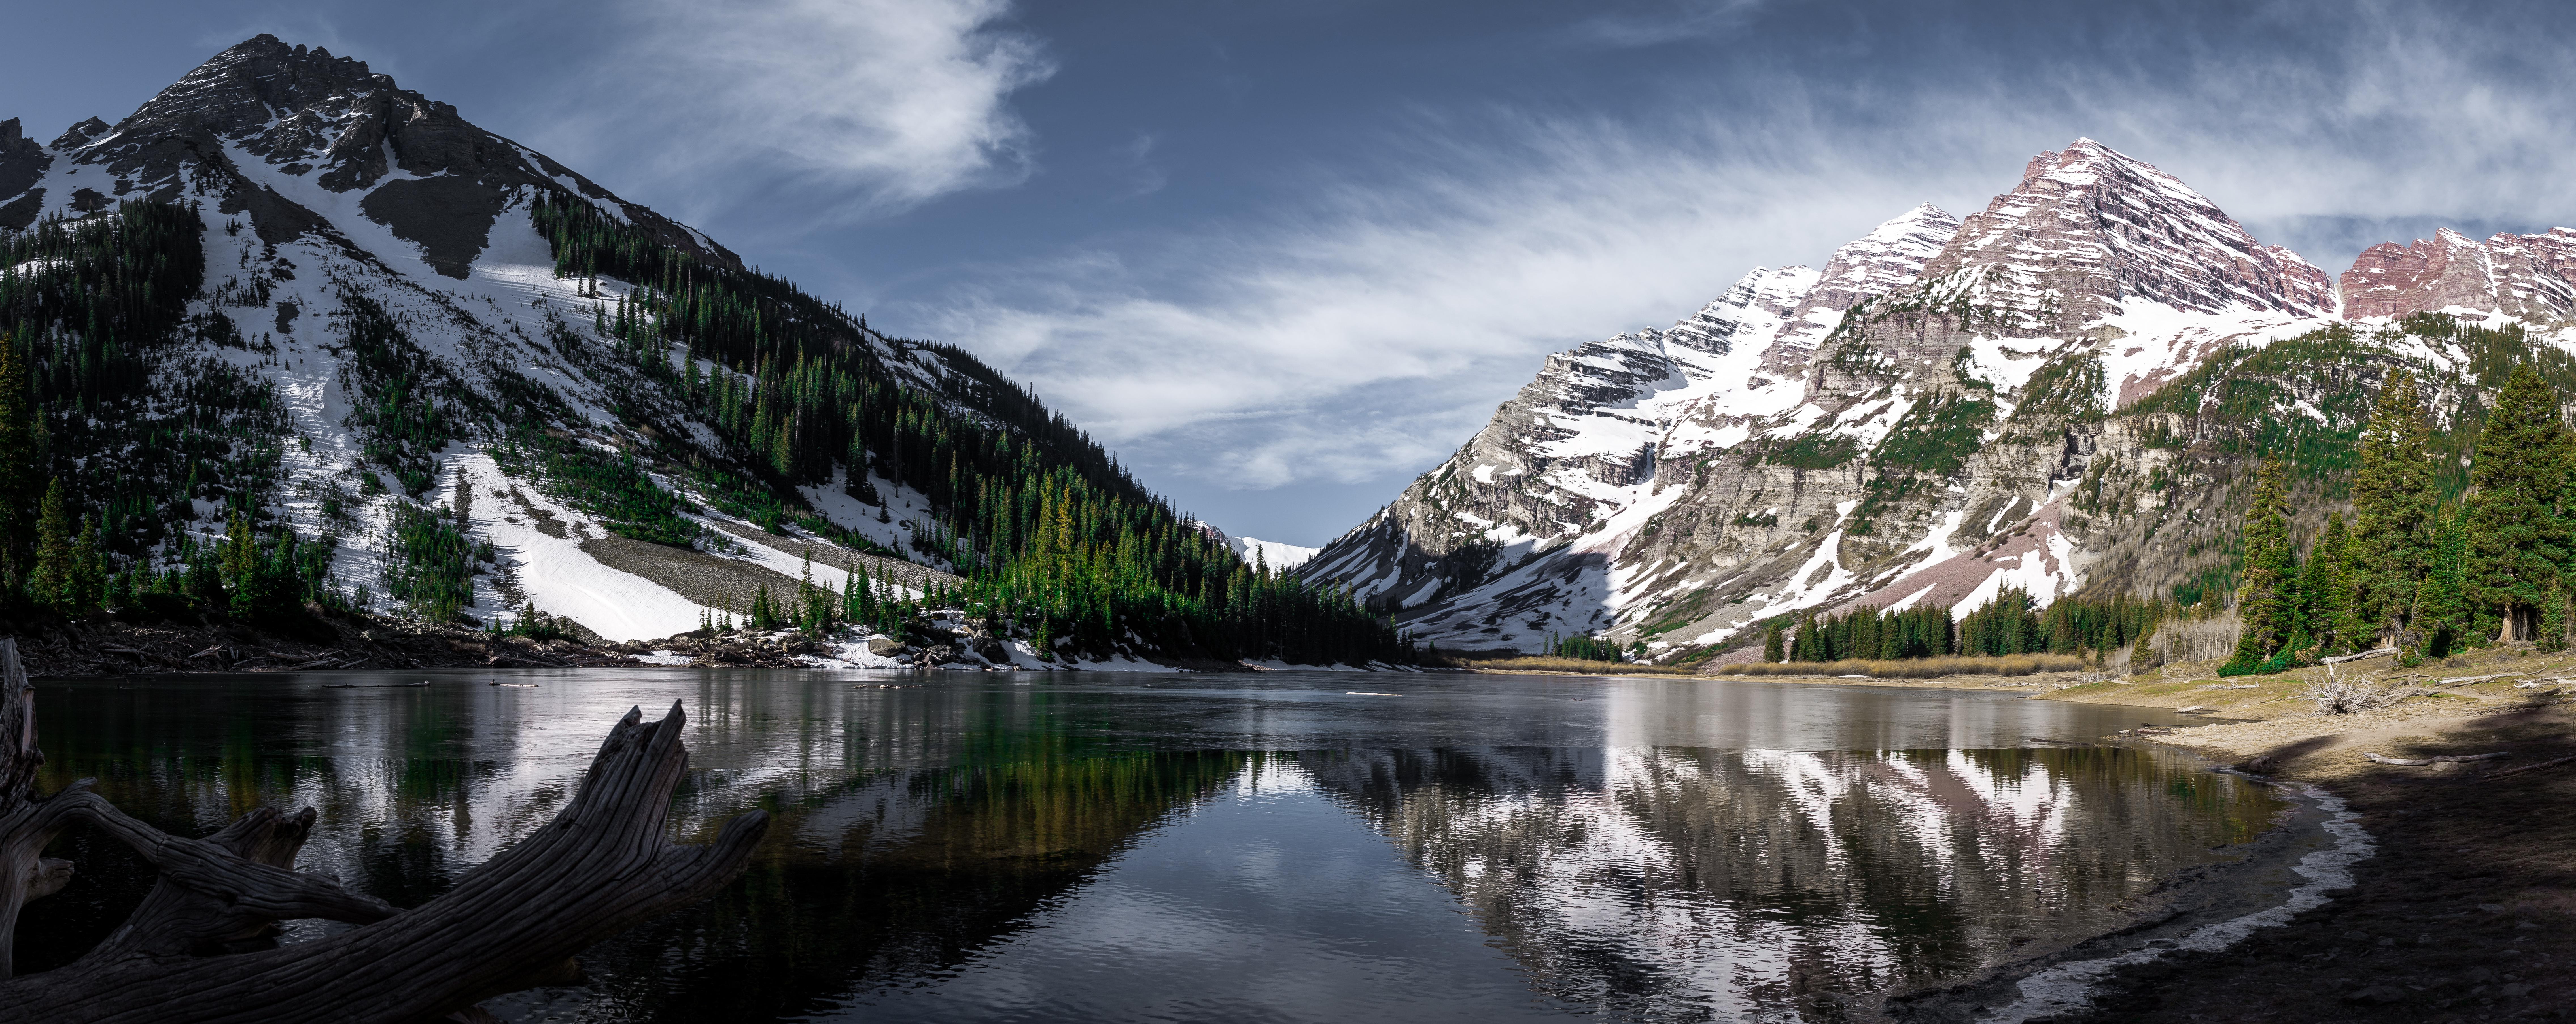 Landscape Lake Nature Snow Beach Trees Water Sky Clouds 9090x3614